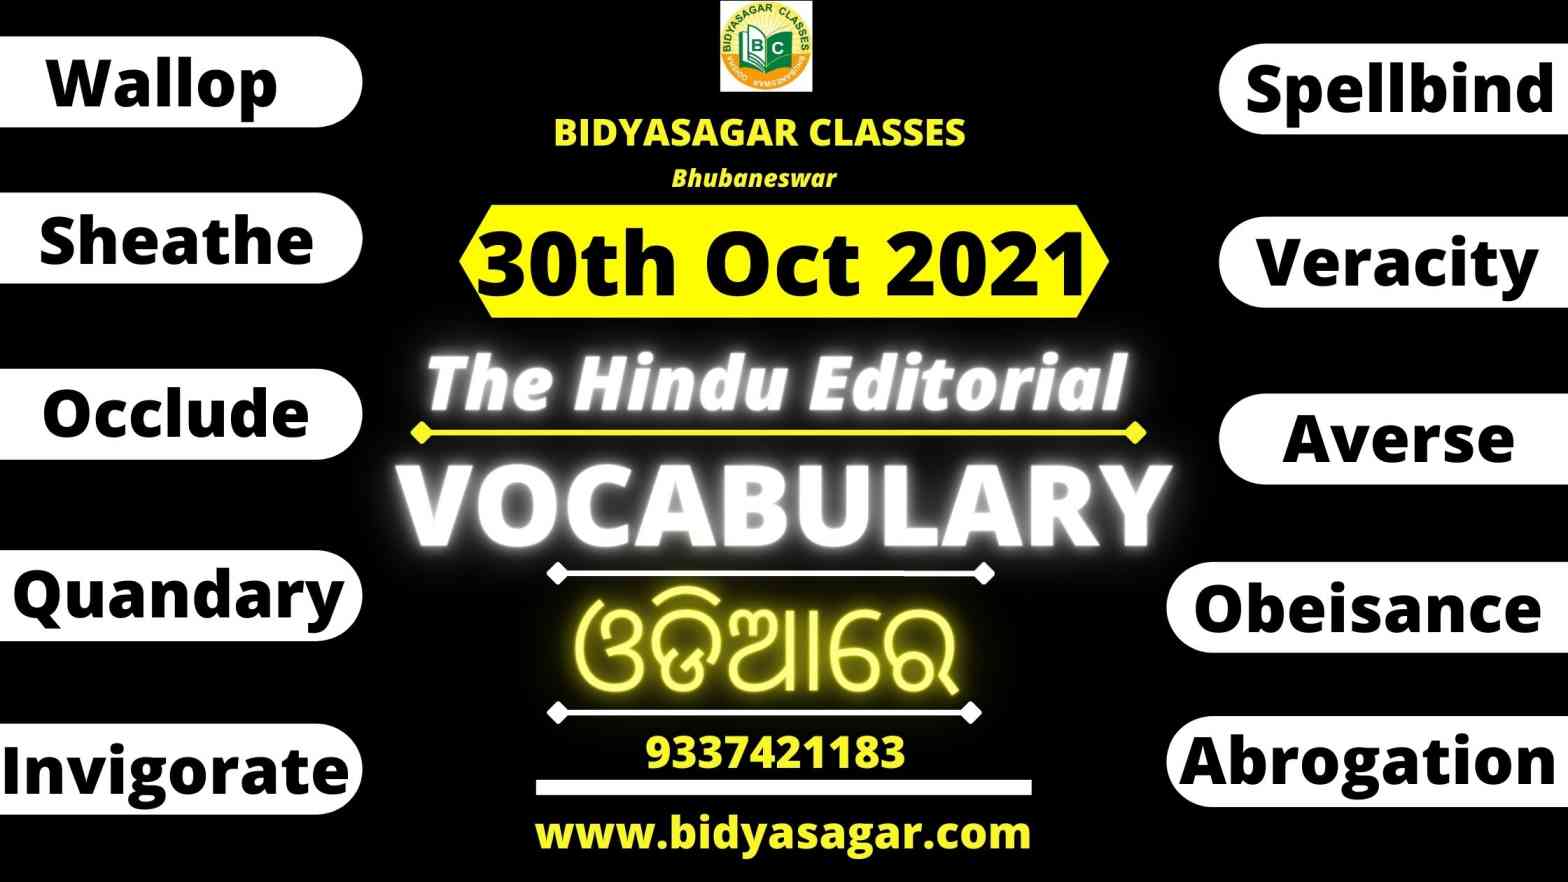 The Hindu Editorial Vocabulary of 30th October 2021